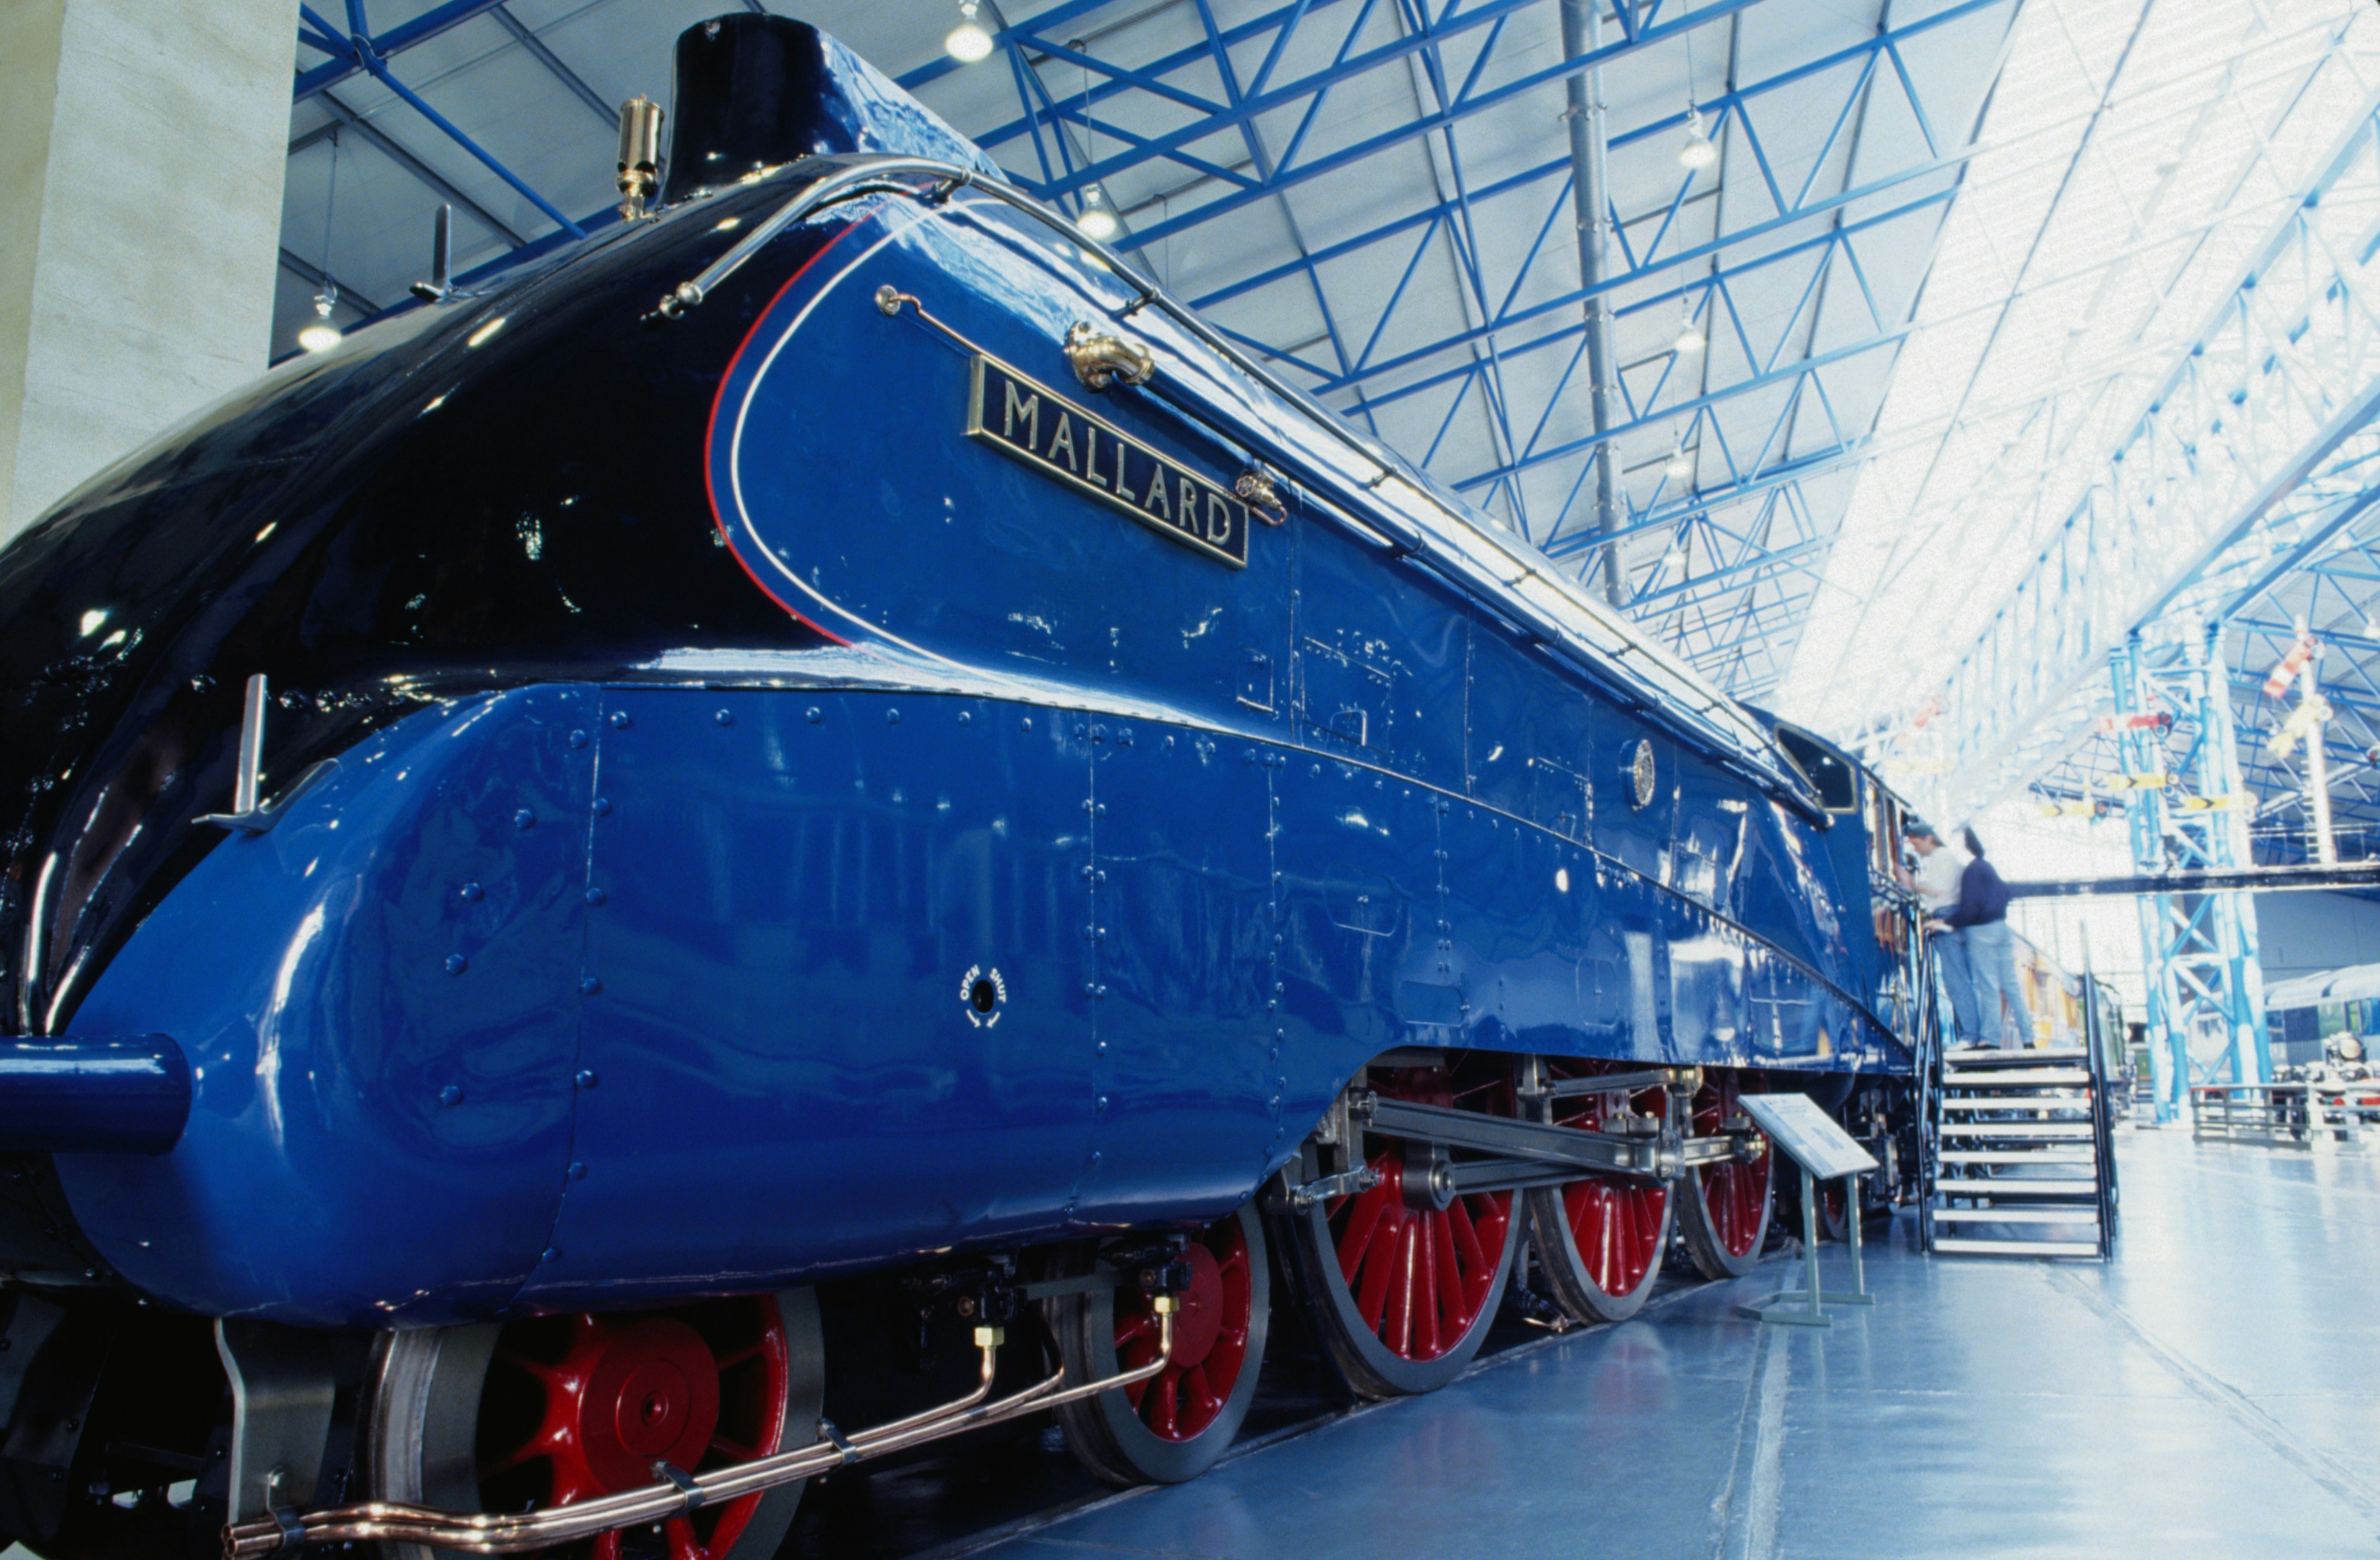 The National Railway Museum in York.